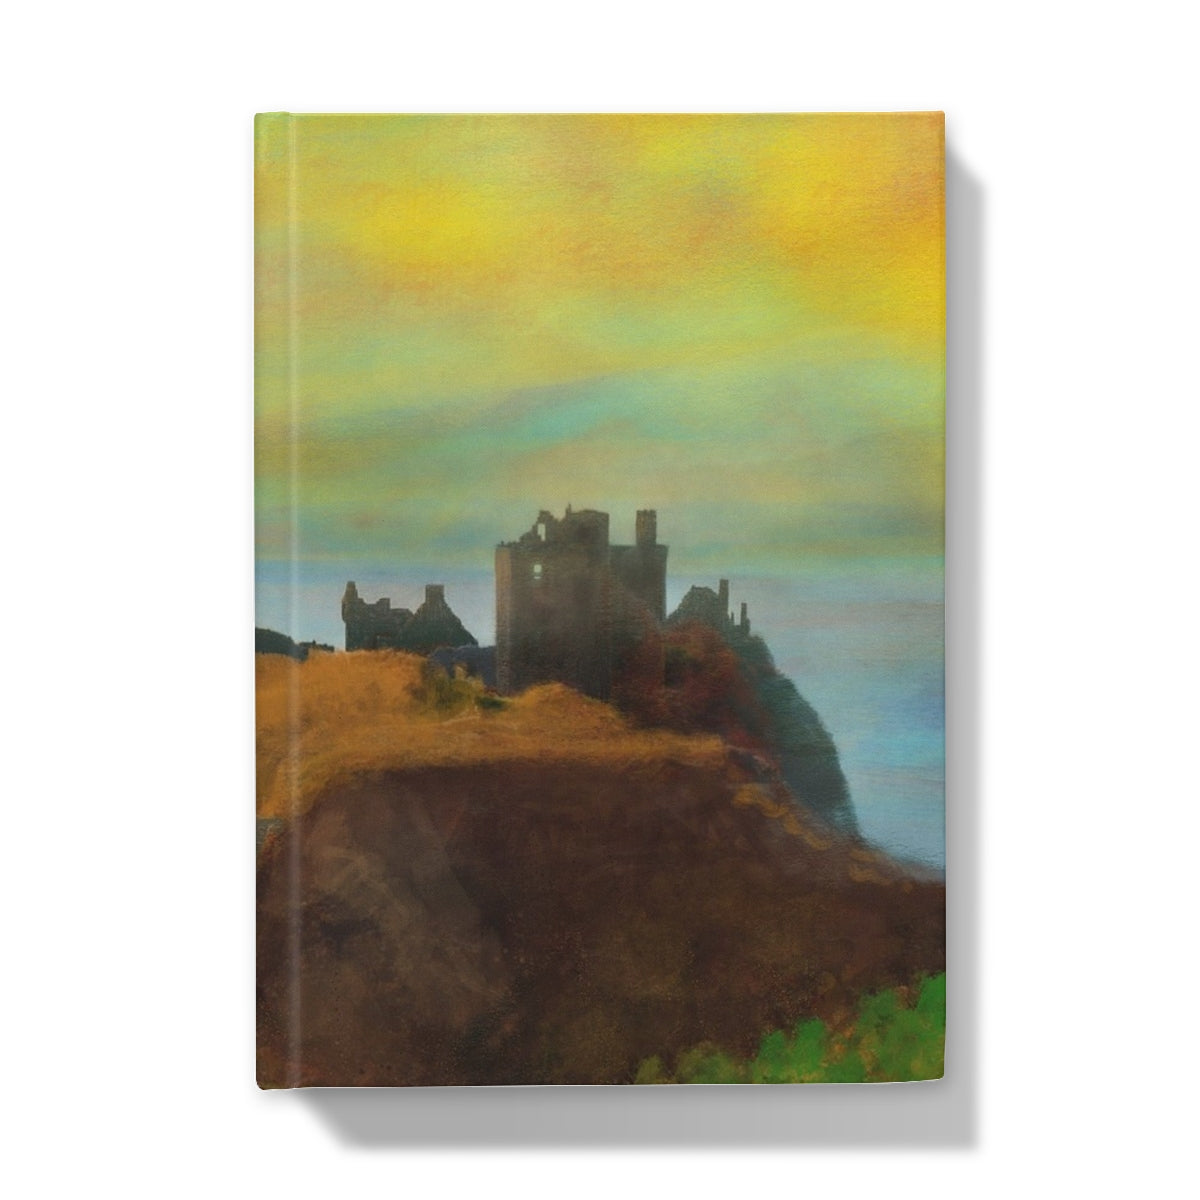 Dunnottar Castle Art Gifts Hardback Journal-Journals & Notebooks-Historic & Iconic Scotland Art Gallery-A4-Lined-Paintings, Prints, Homeware, Art Gifts From Scotland By Scottish Artist Kevin Hunter